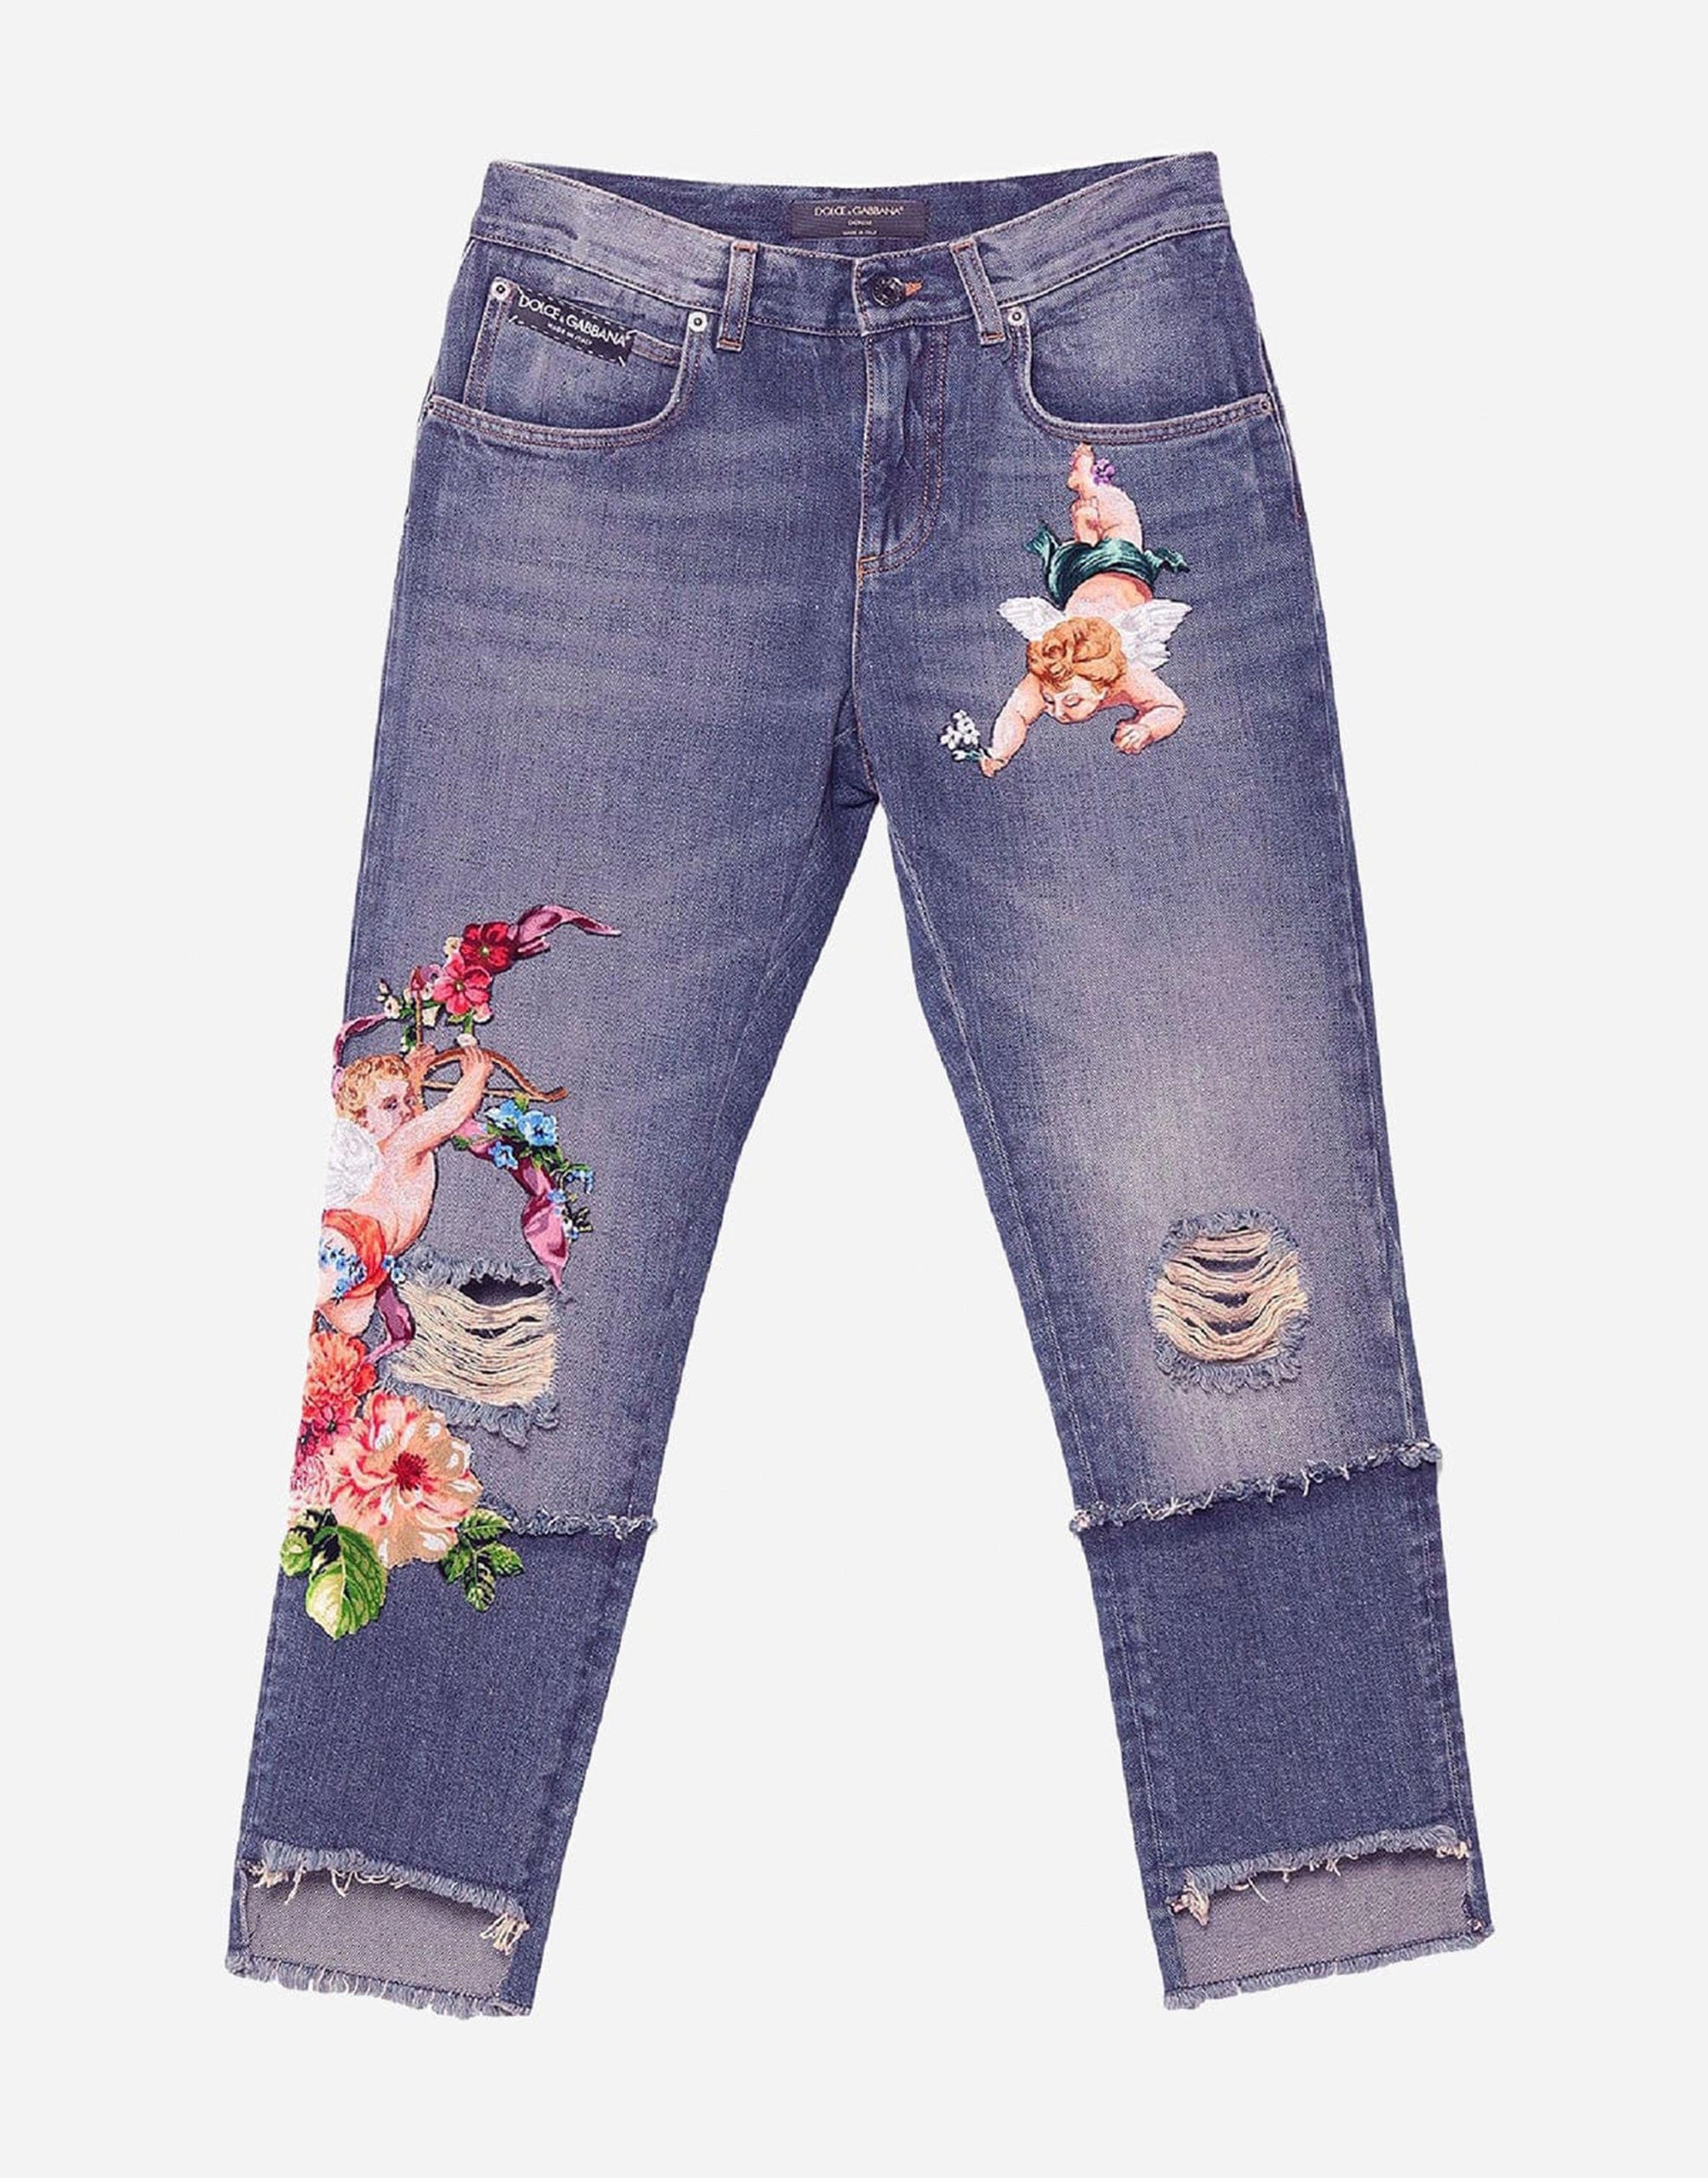 Dolce & Gabbana Embroidered Jeans